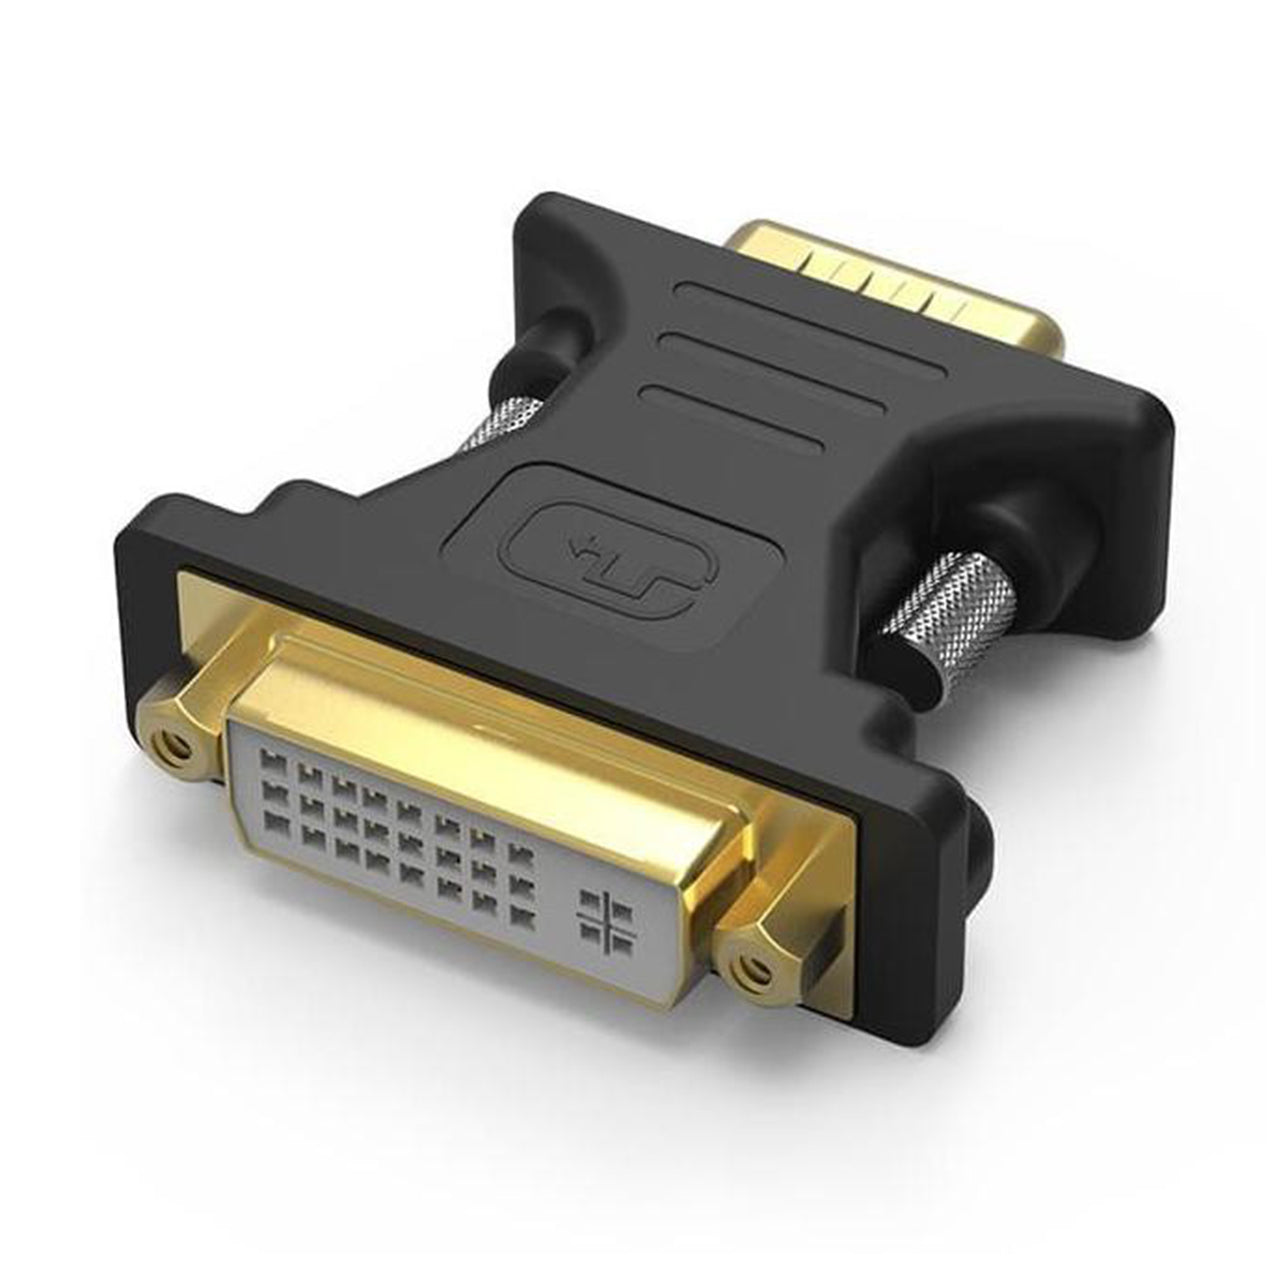 Vention DVI Female (24+5) to VGA Male Adapter 1080p 60Hz Converter Gold-plated with Fastened Screws for TV Projector PC (DV350VG)